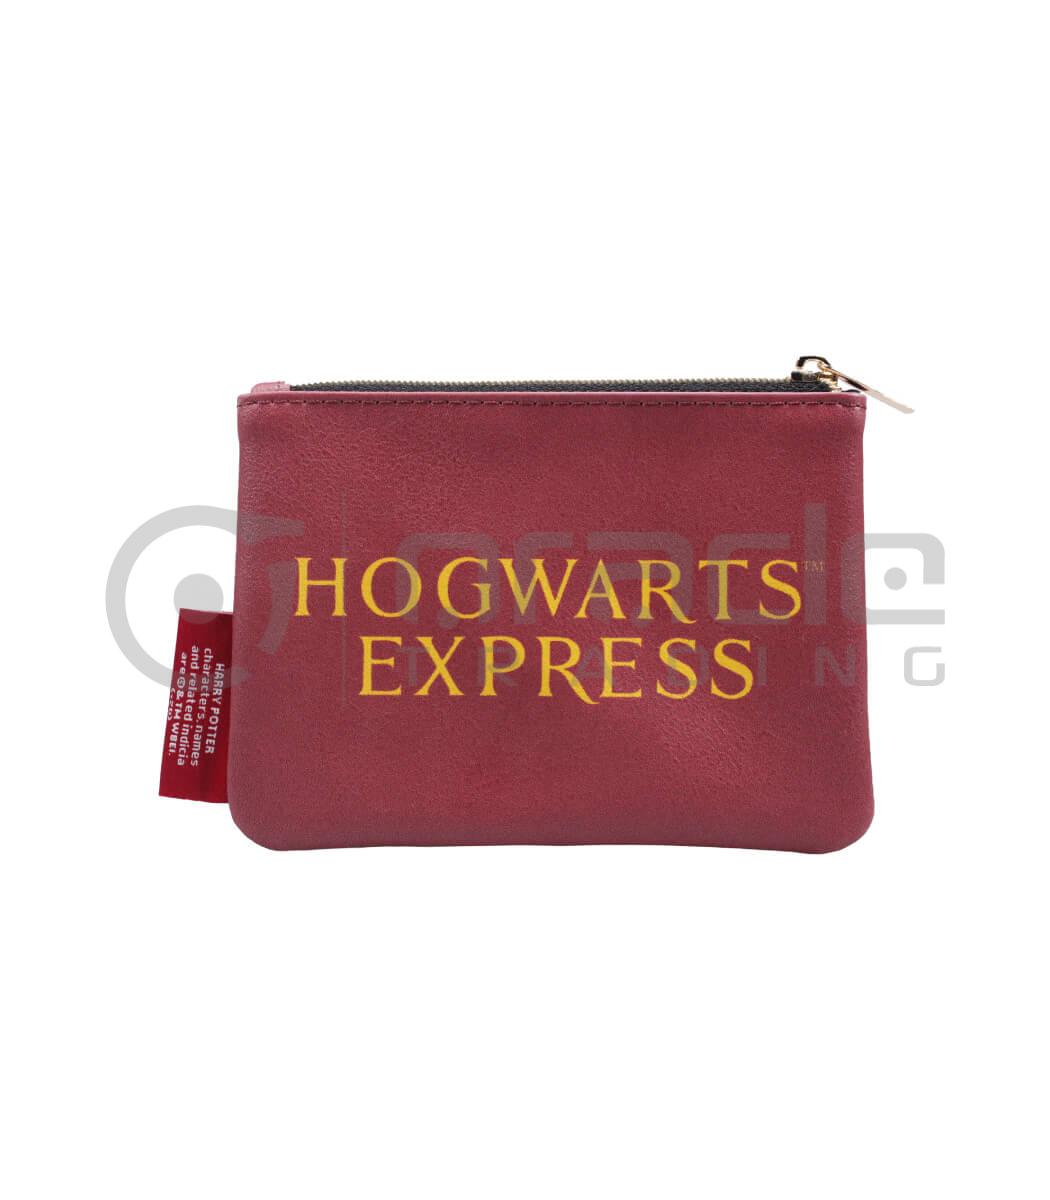 LeSportsac x Harry Potter New Collection Has Bags And Pouches